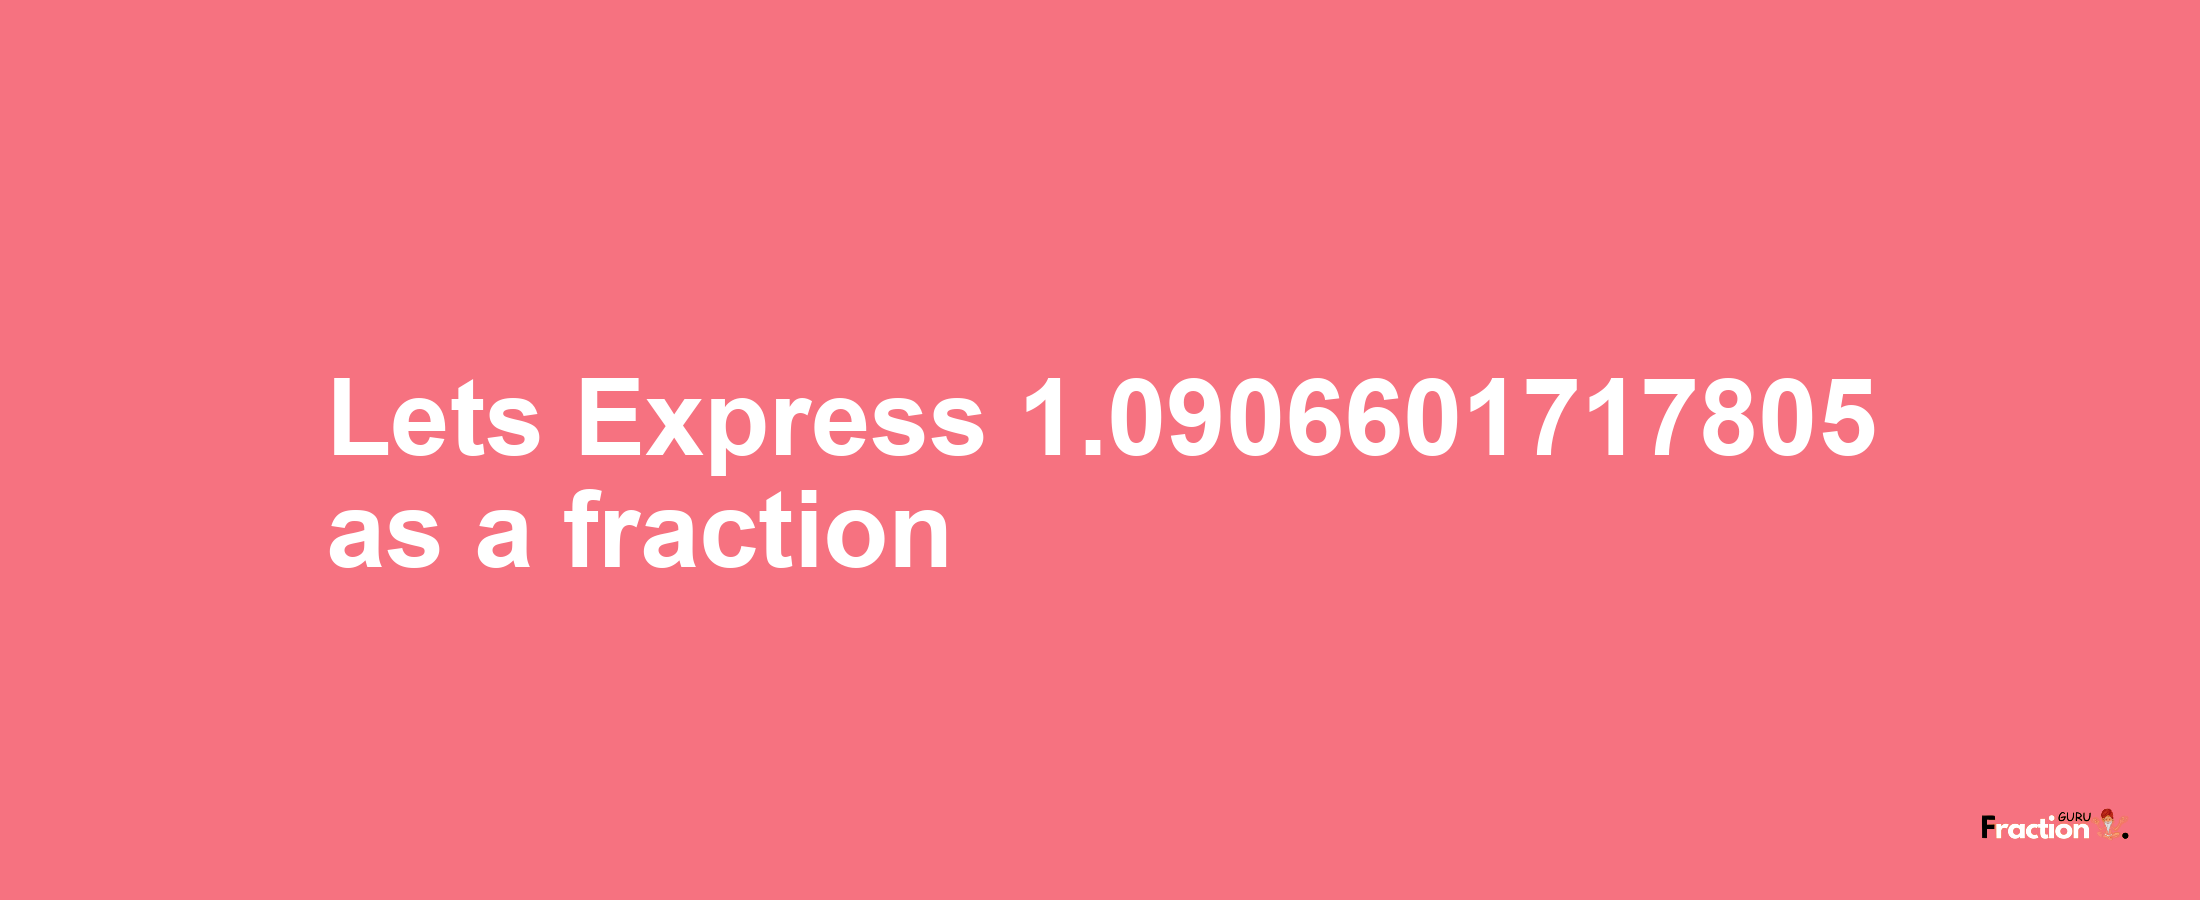 Lets Express 1.0906601717805 as afraction